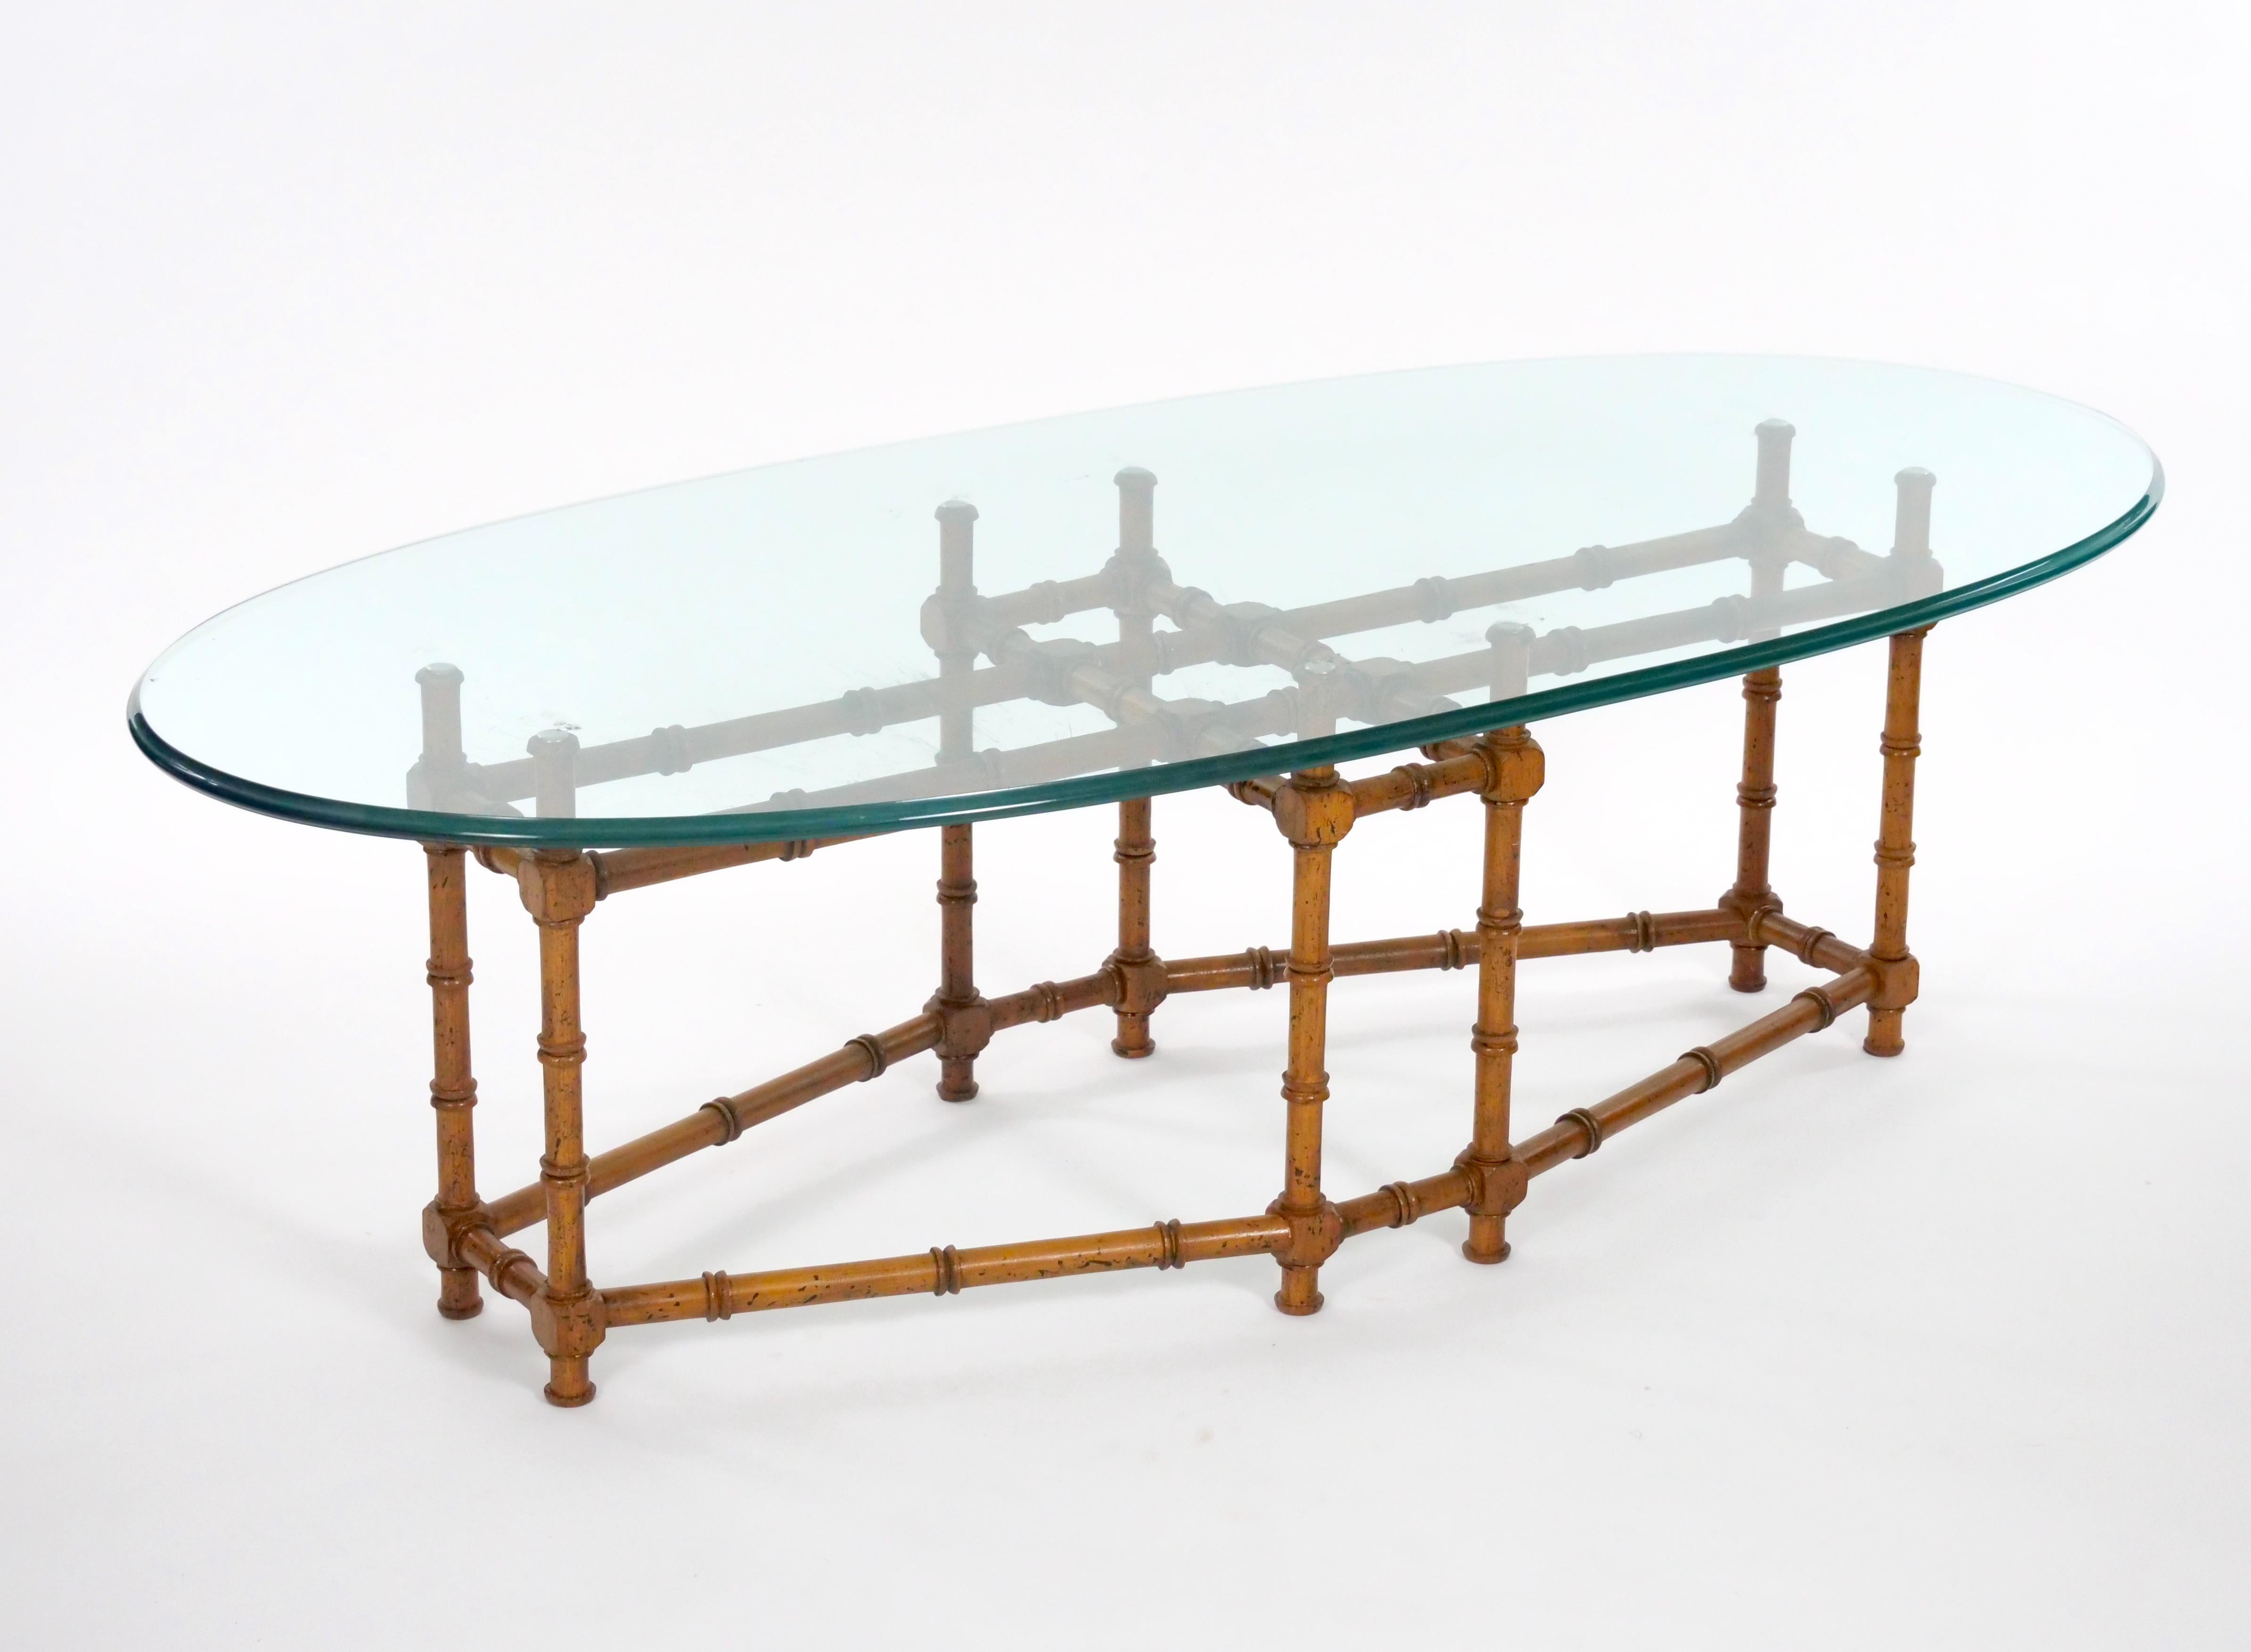 
Introducing a captivating Mid-20th Century coffee table with a distinctive surfboard shape glass top and a faux bamboo base, exuding both style and charm. This vintage piece is in good condition, showcasing the enduring appeal of mid-century